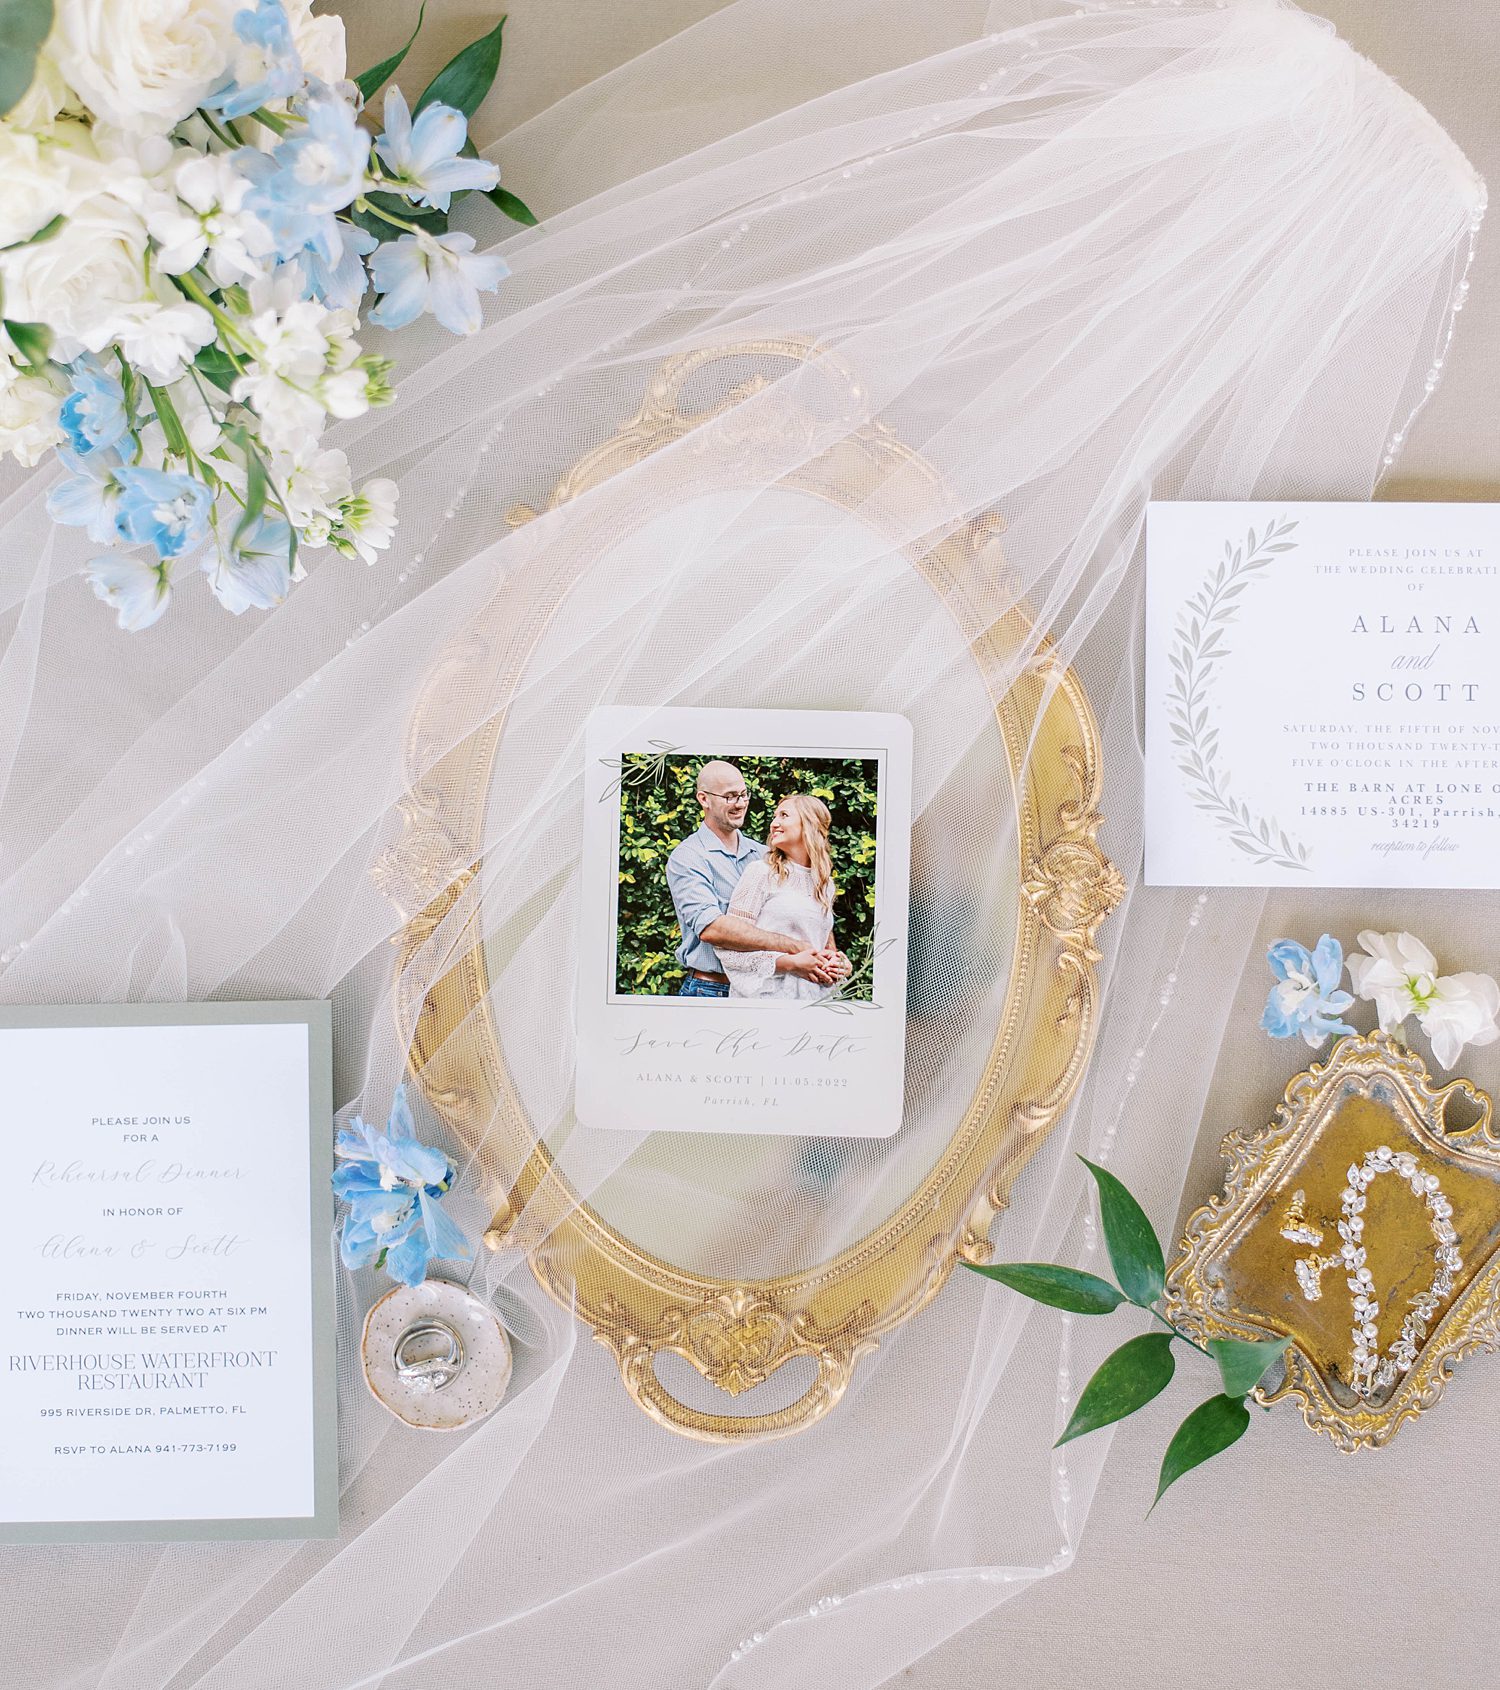 details for Tampa FL wedding day on bride's veil and gold plate